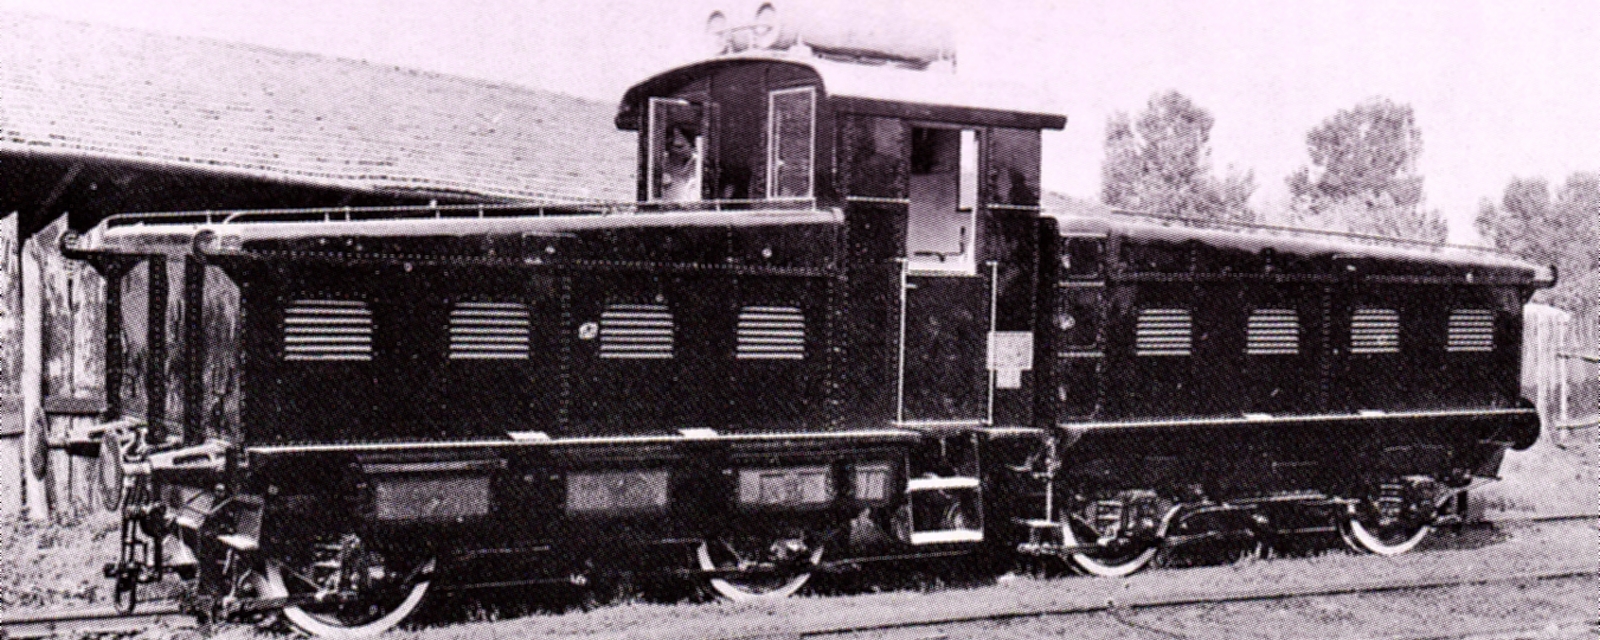 Works photo of the E.421